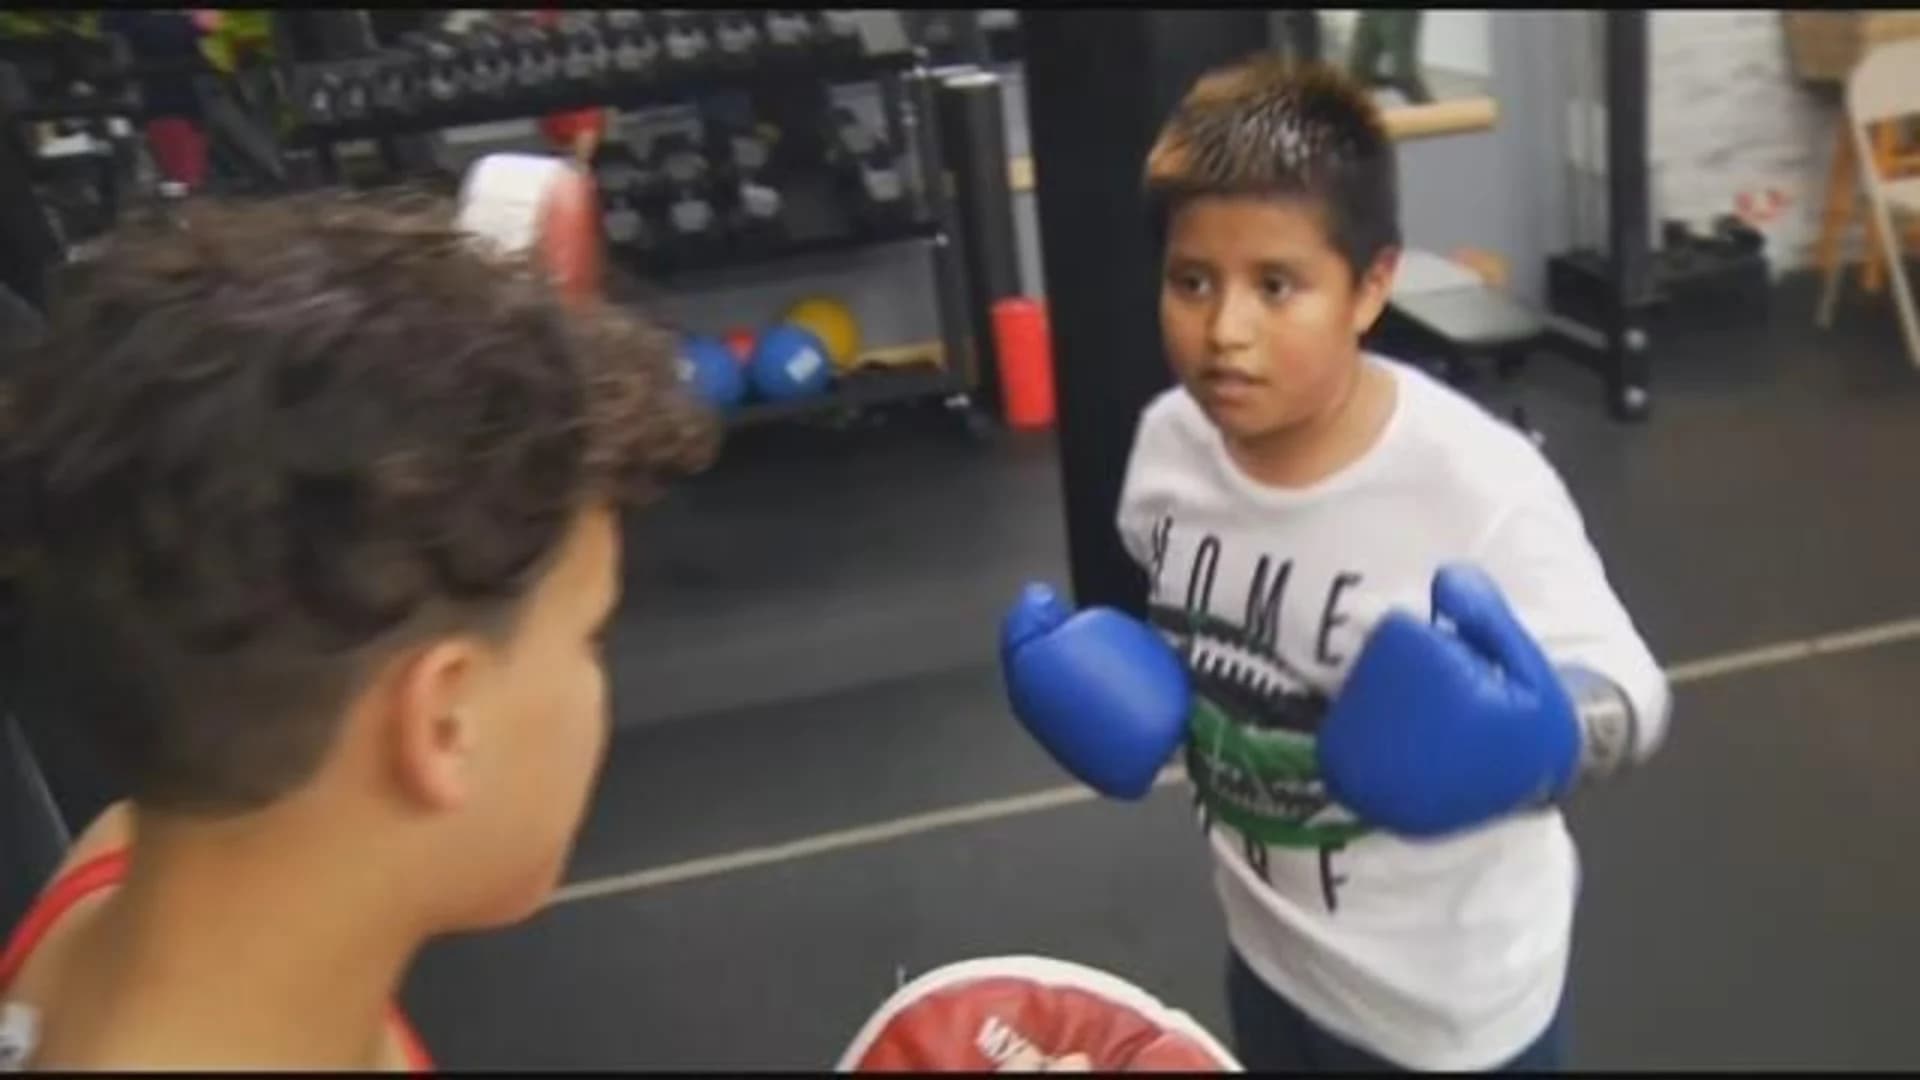 Sunset Park gym offers free boxing program for youths